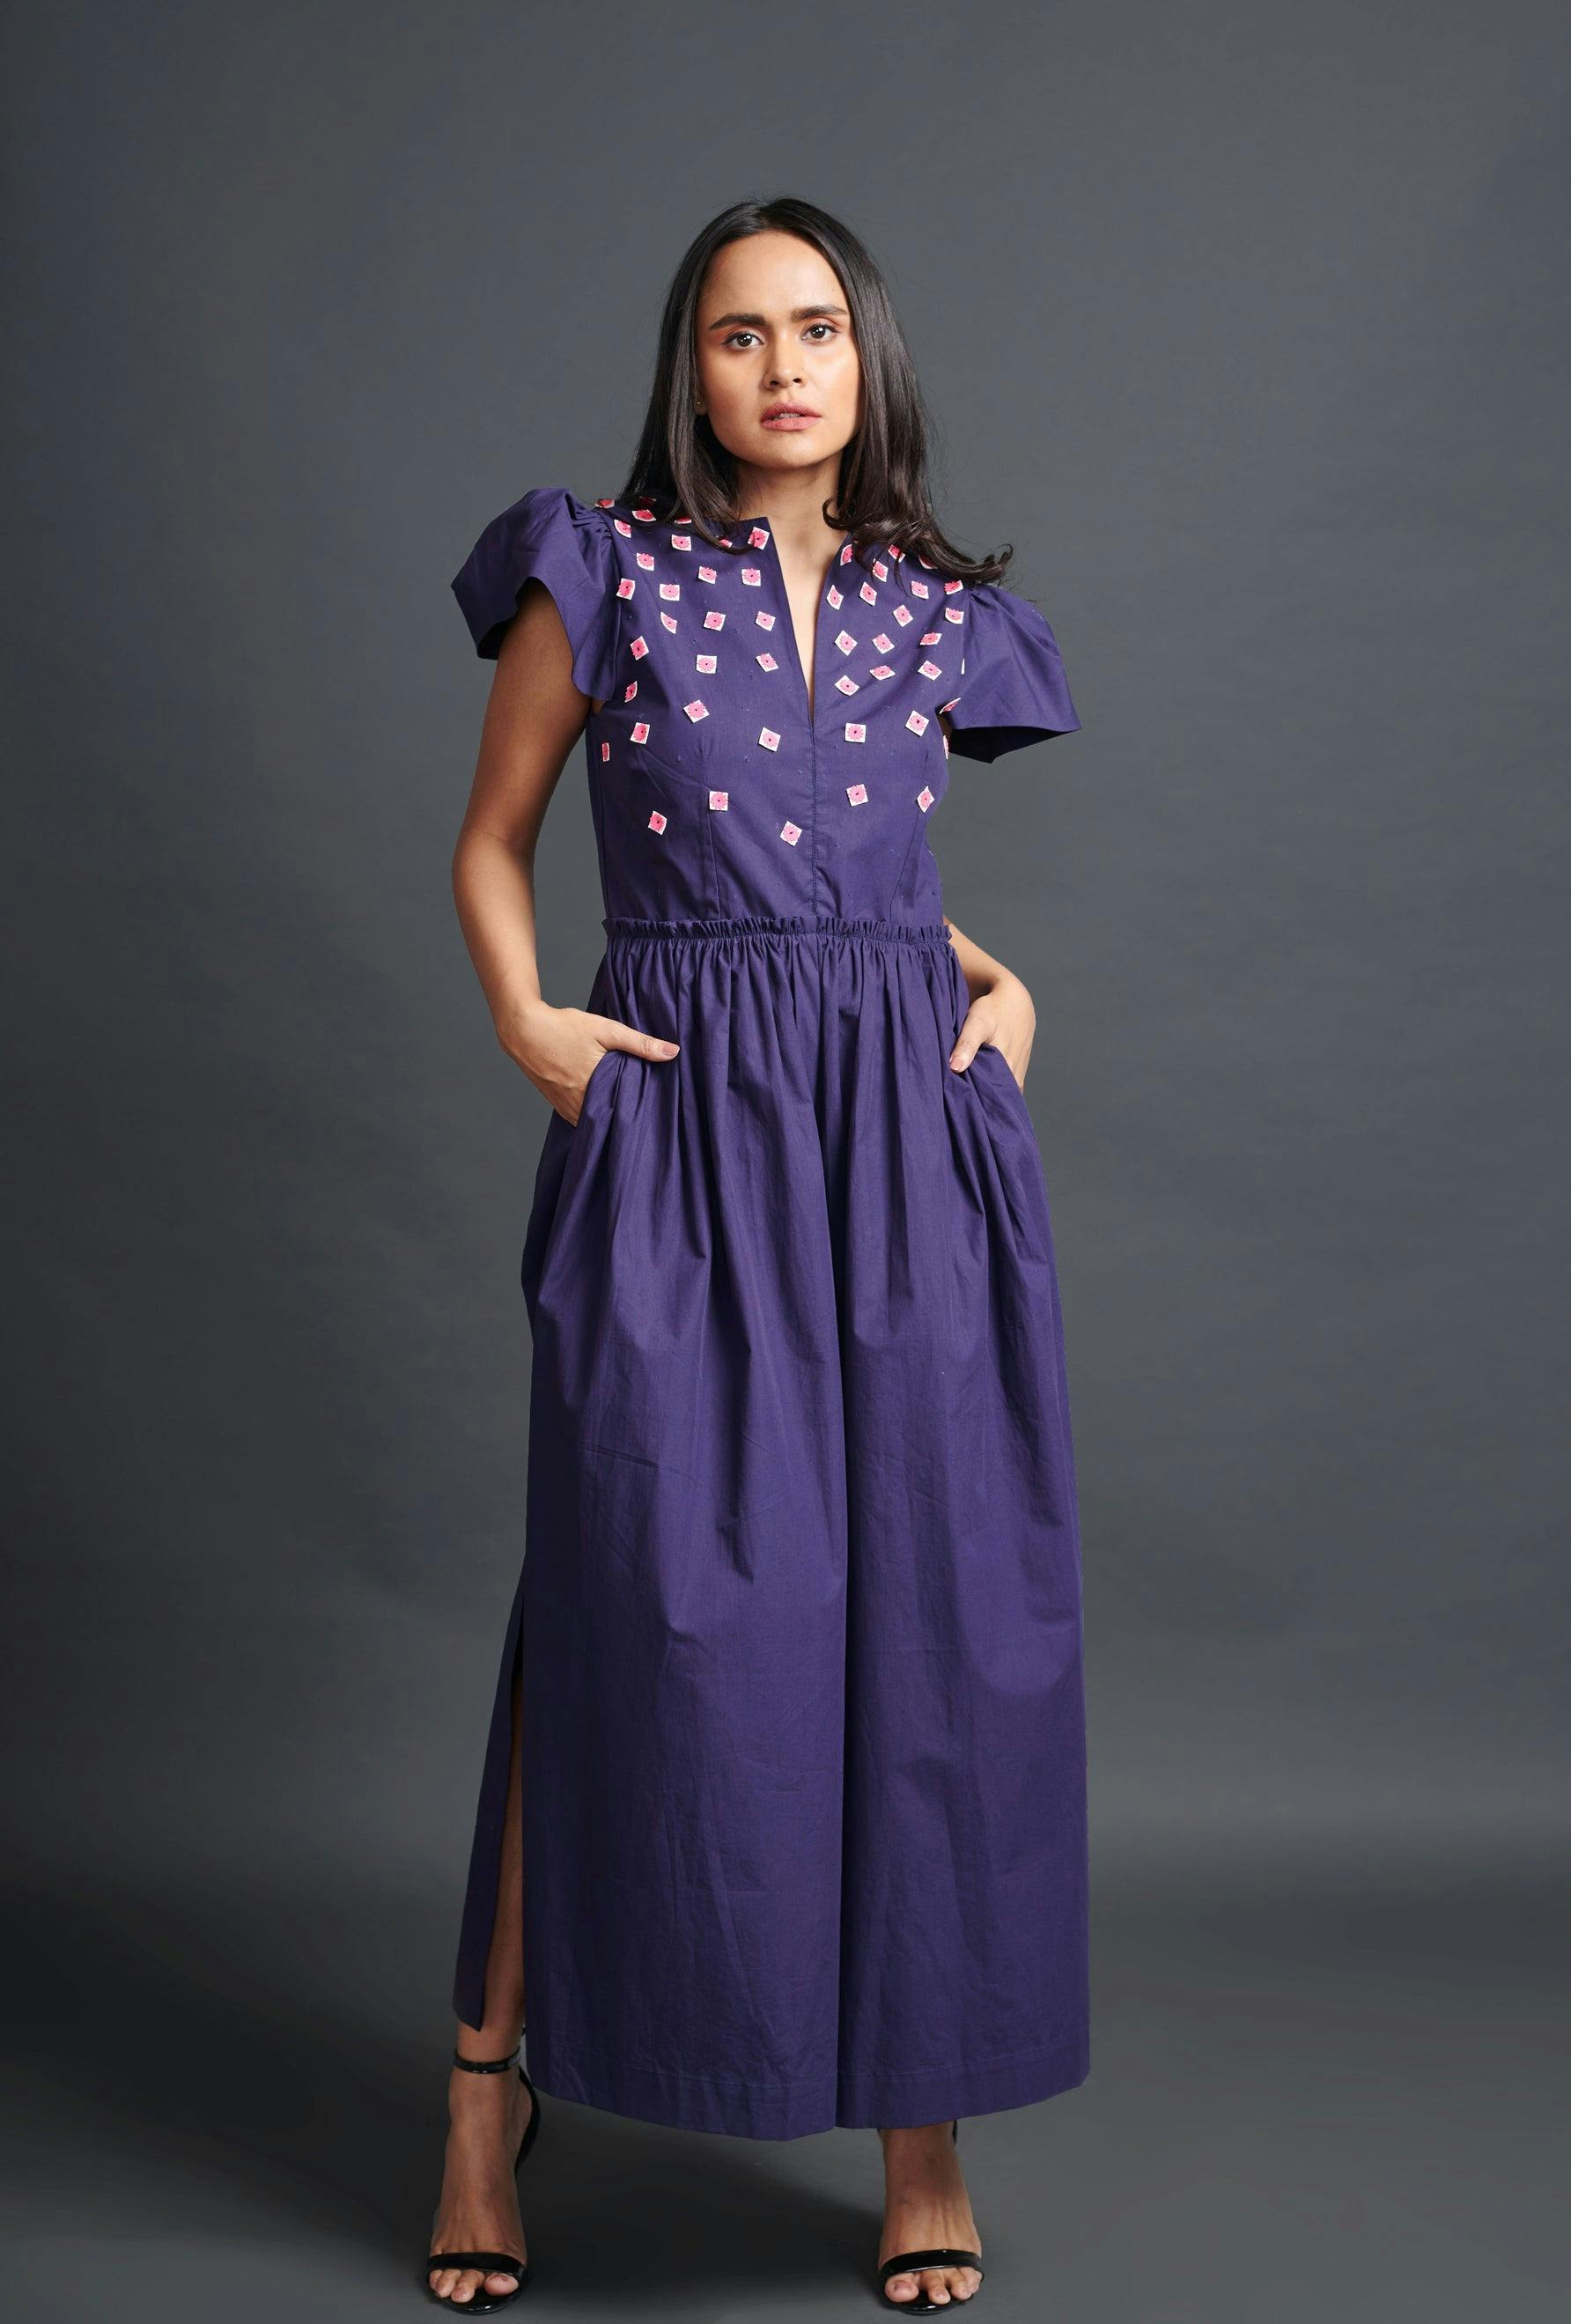 WF-1103-PURPLE ::: Purple Jumpsuit With Embroidery, a product by Deepika Arora